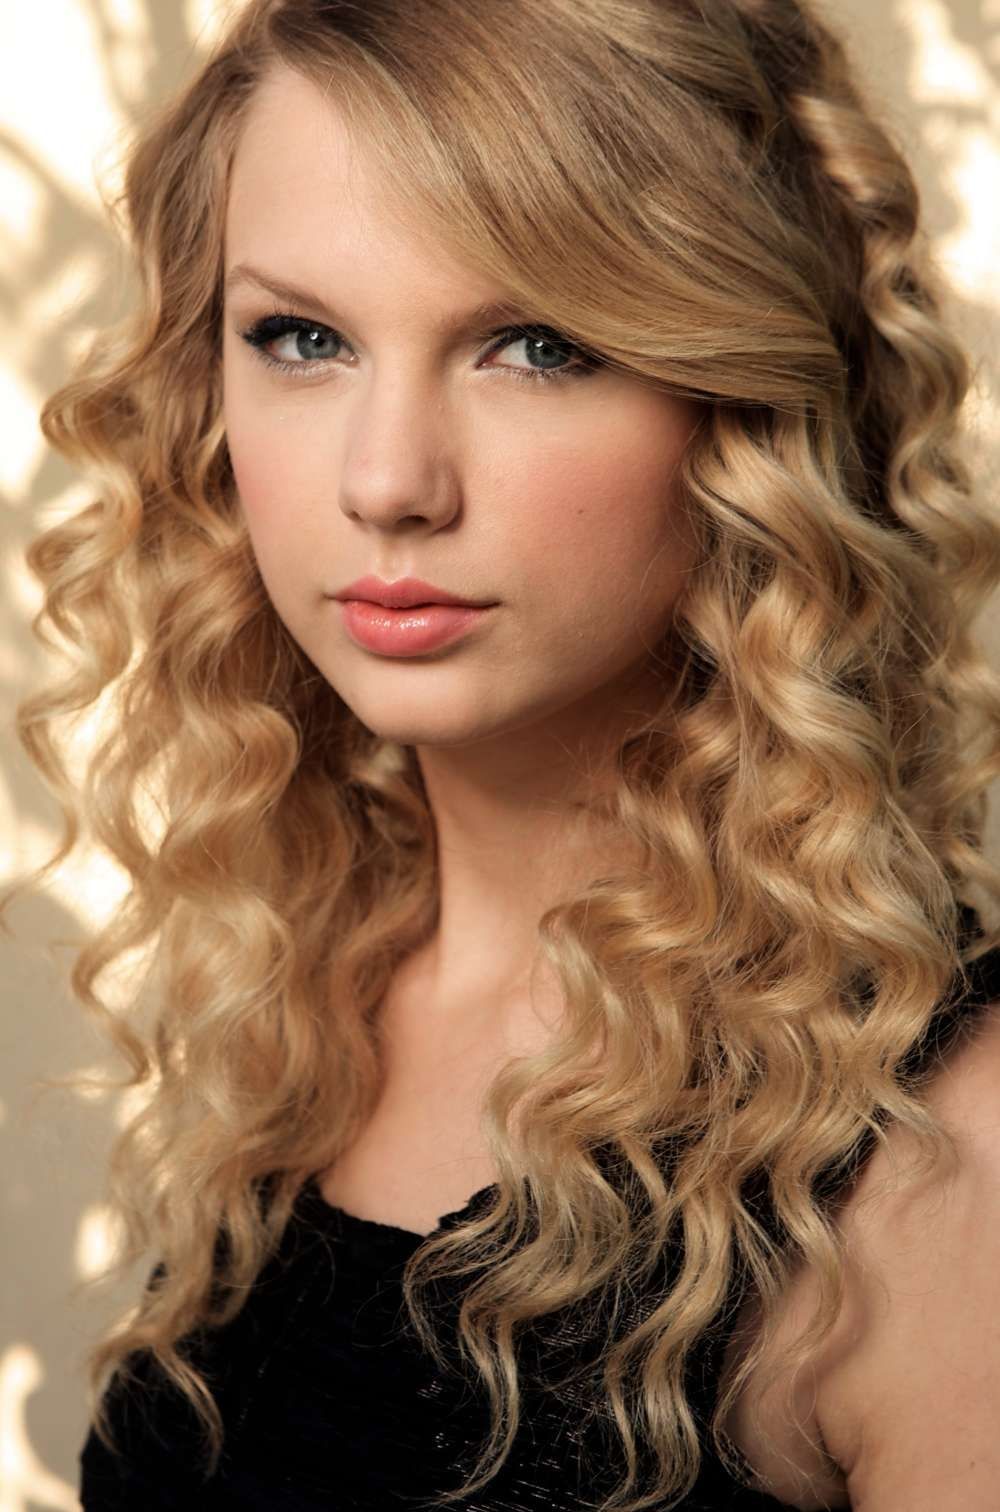 American-Singer-Taylor-Swift-Cute-Hot-Sexy-New-Wallpaper (24 ...